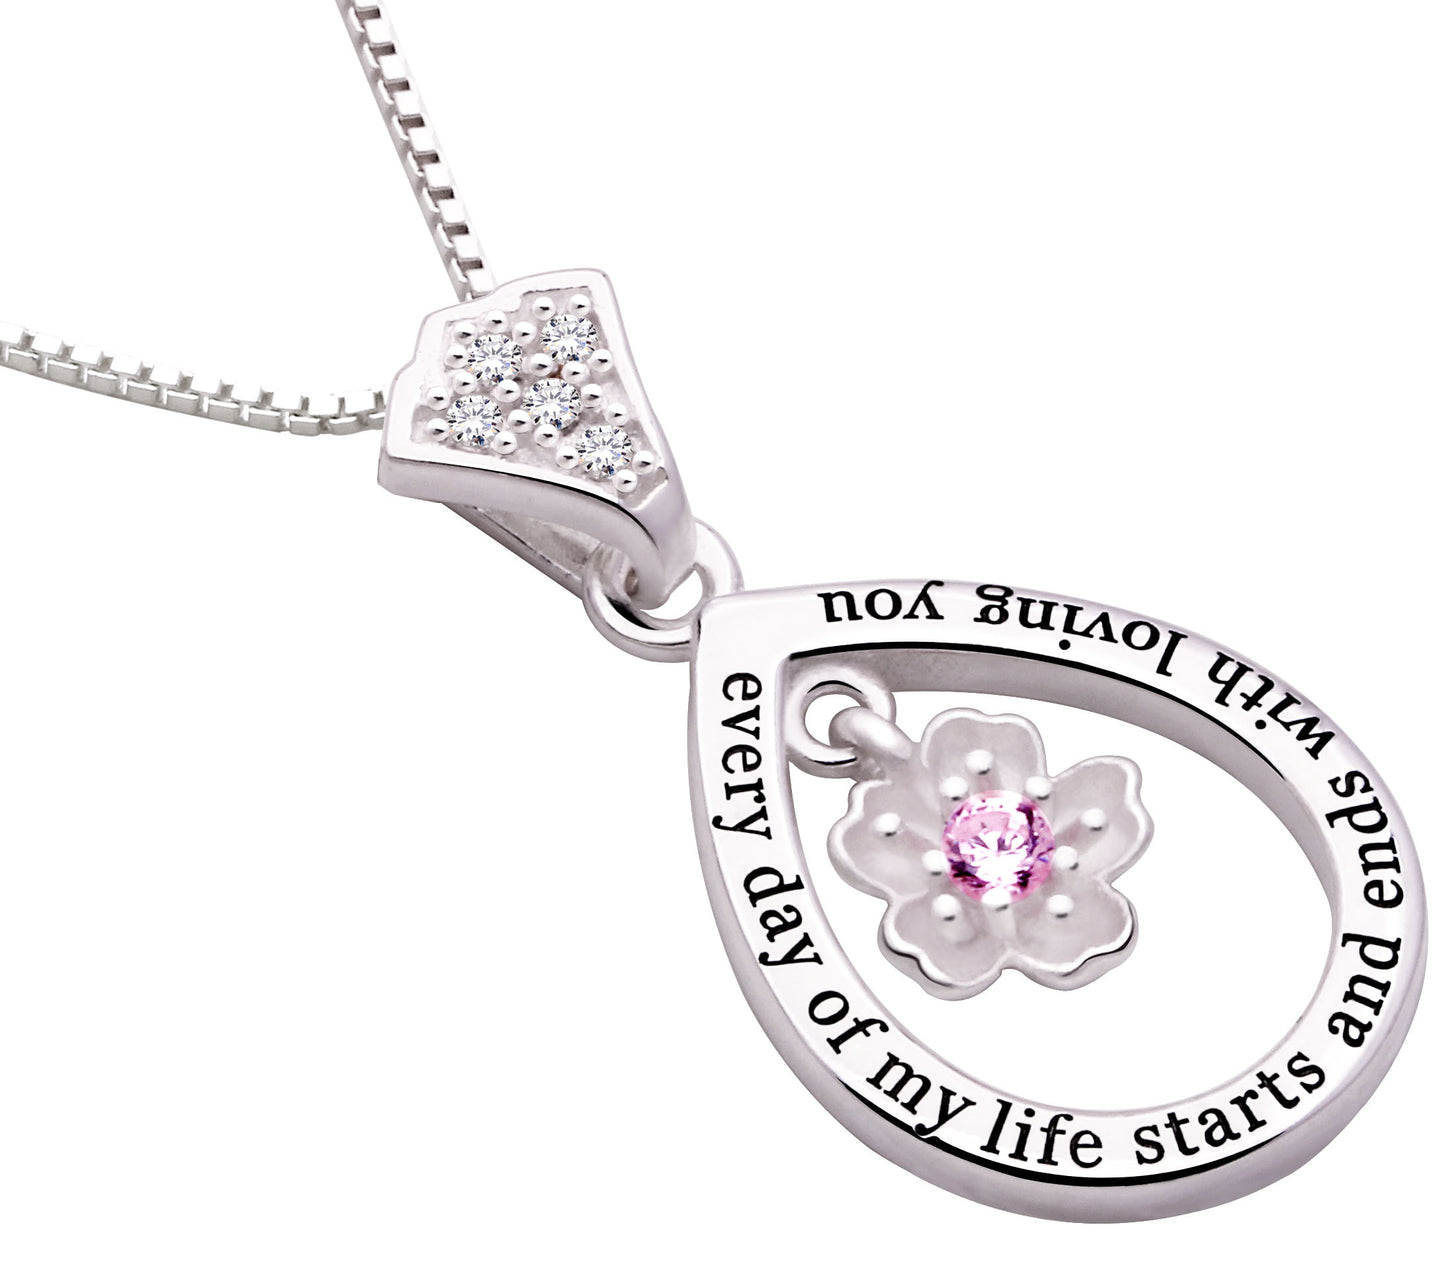 ALOV Jewelry Sterling Silver "every day of my life starts and ends with loving you" Love Cubic Zirconia Pendant Necklace